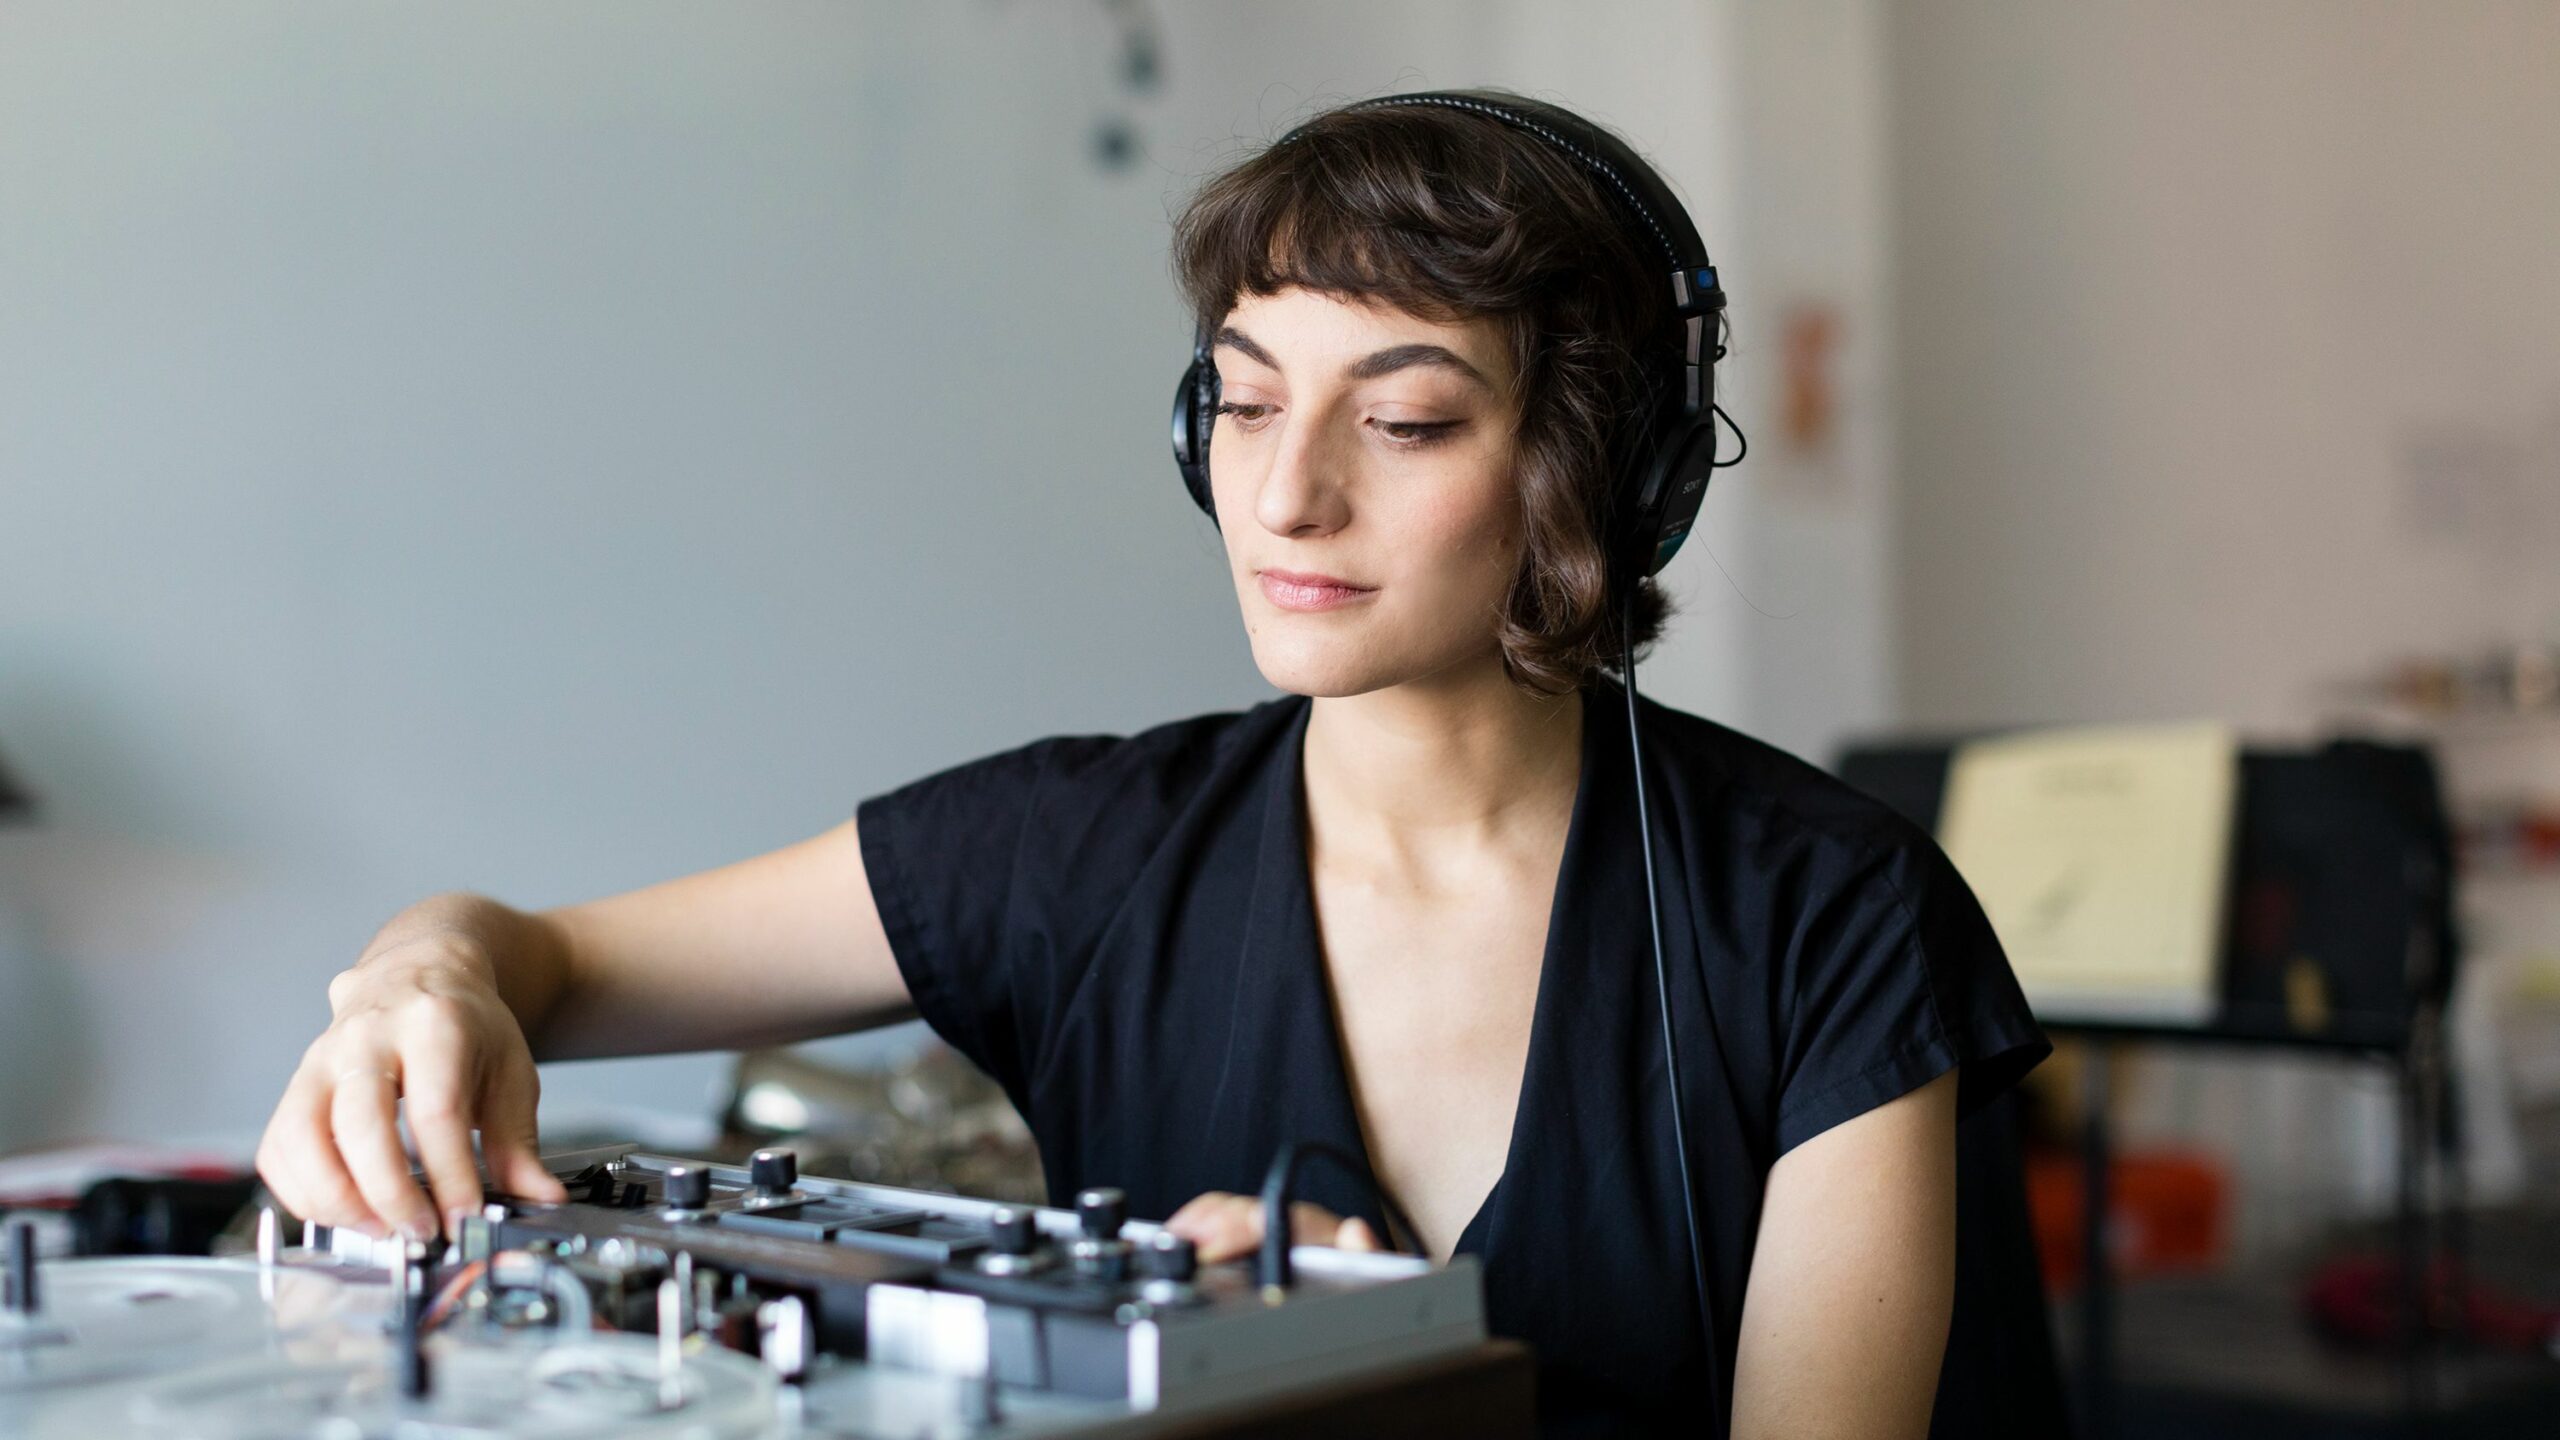 Lea Bertucci_is an experimental musician from New York. COURTESY THE WATERMILL CENTER